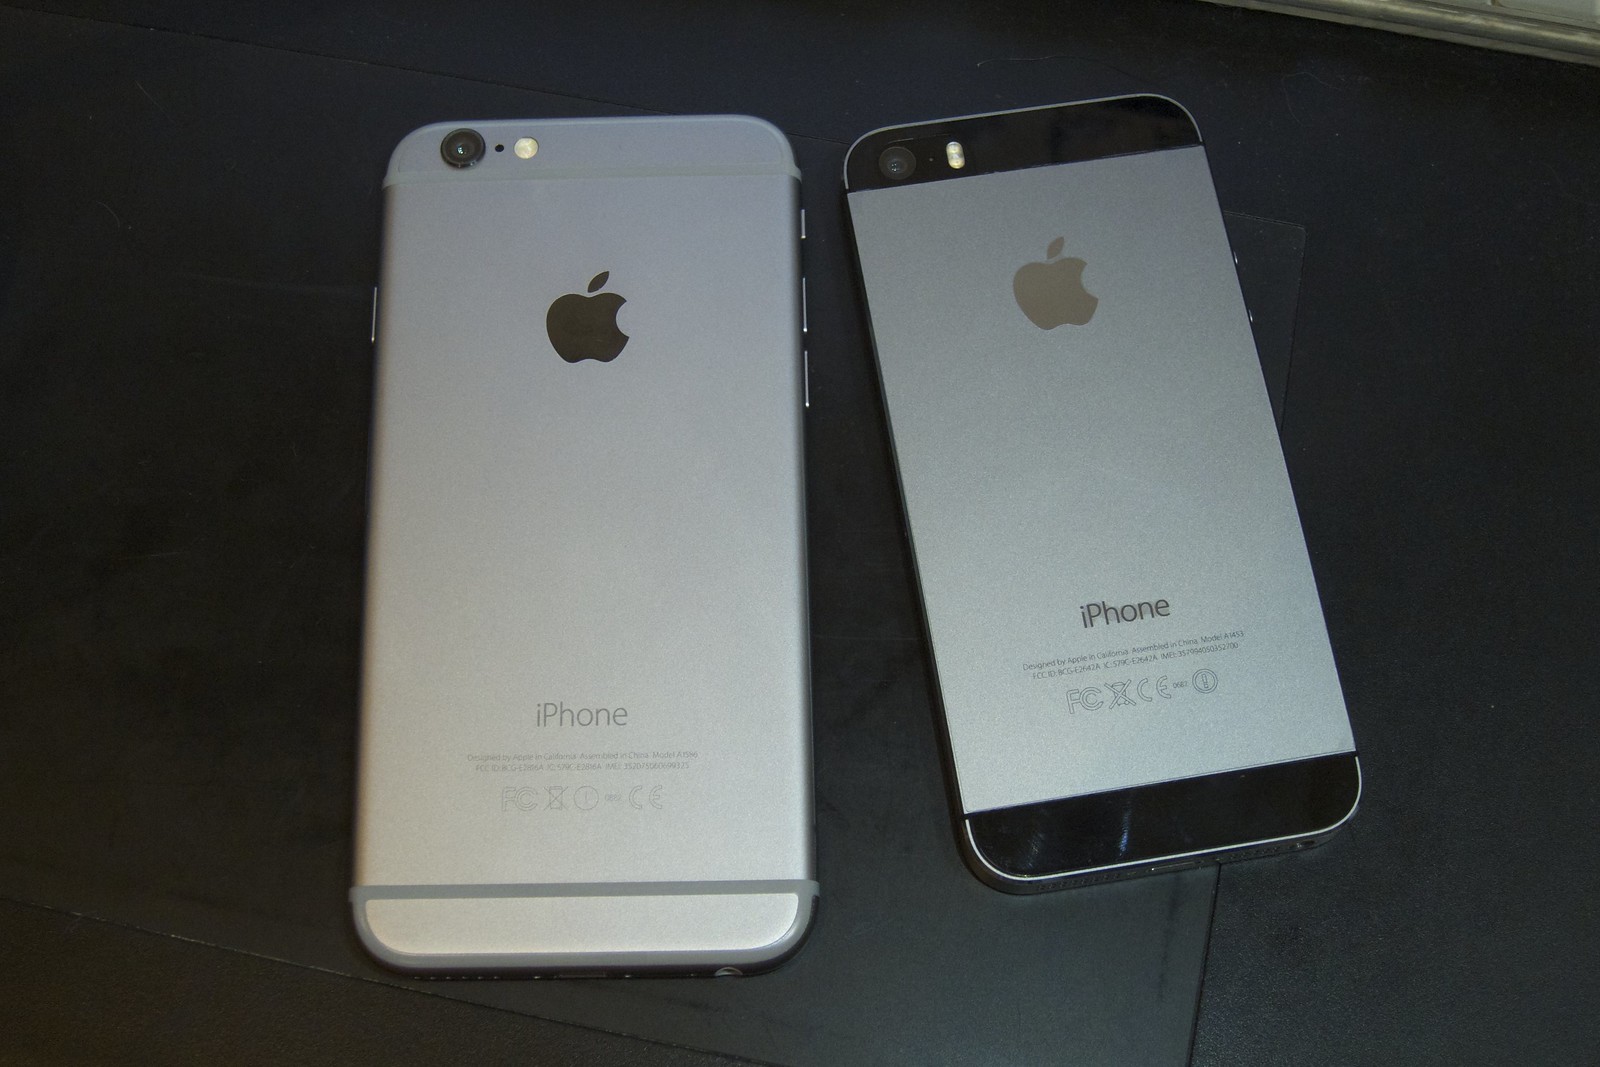 iPhone 6 and 5s Rear panel and edge